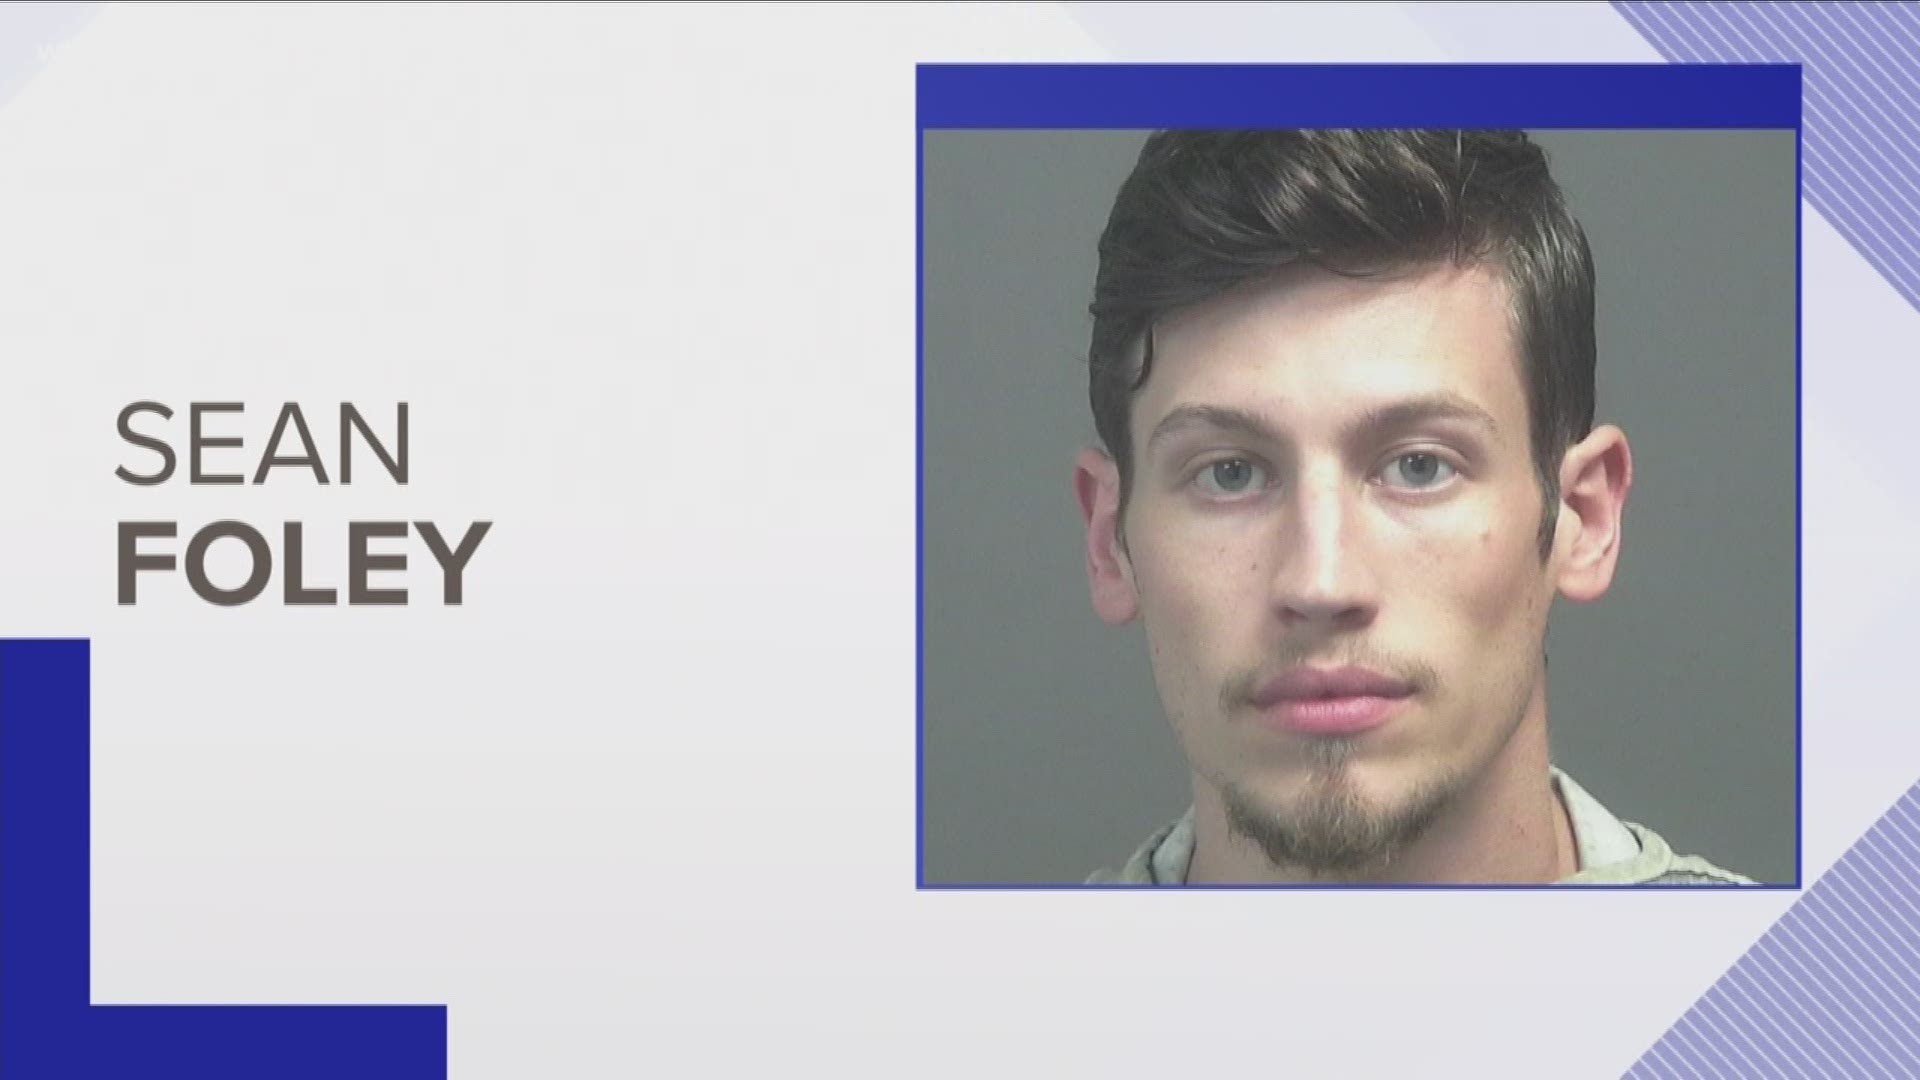 The Blount County Sheriff's Office arrested 24-year-old Sean Foley.